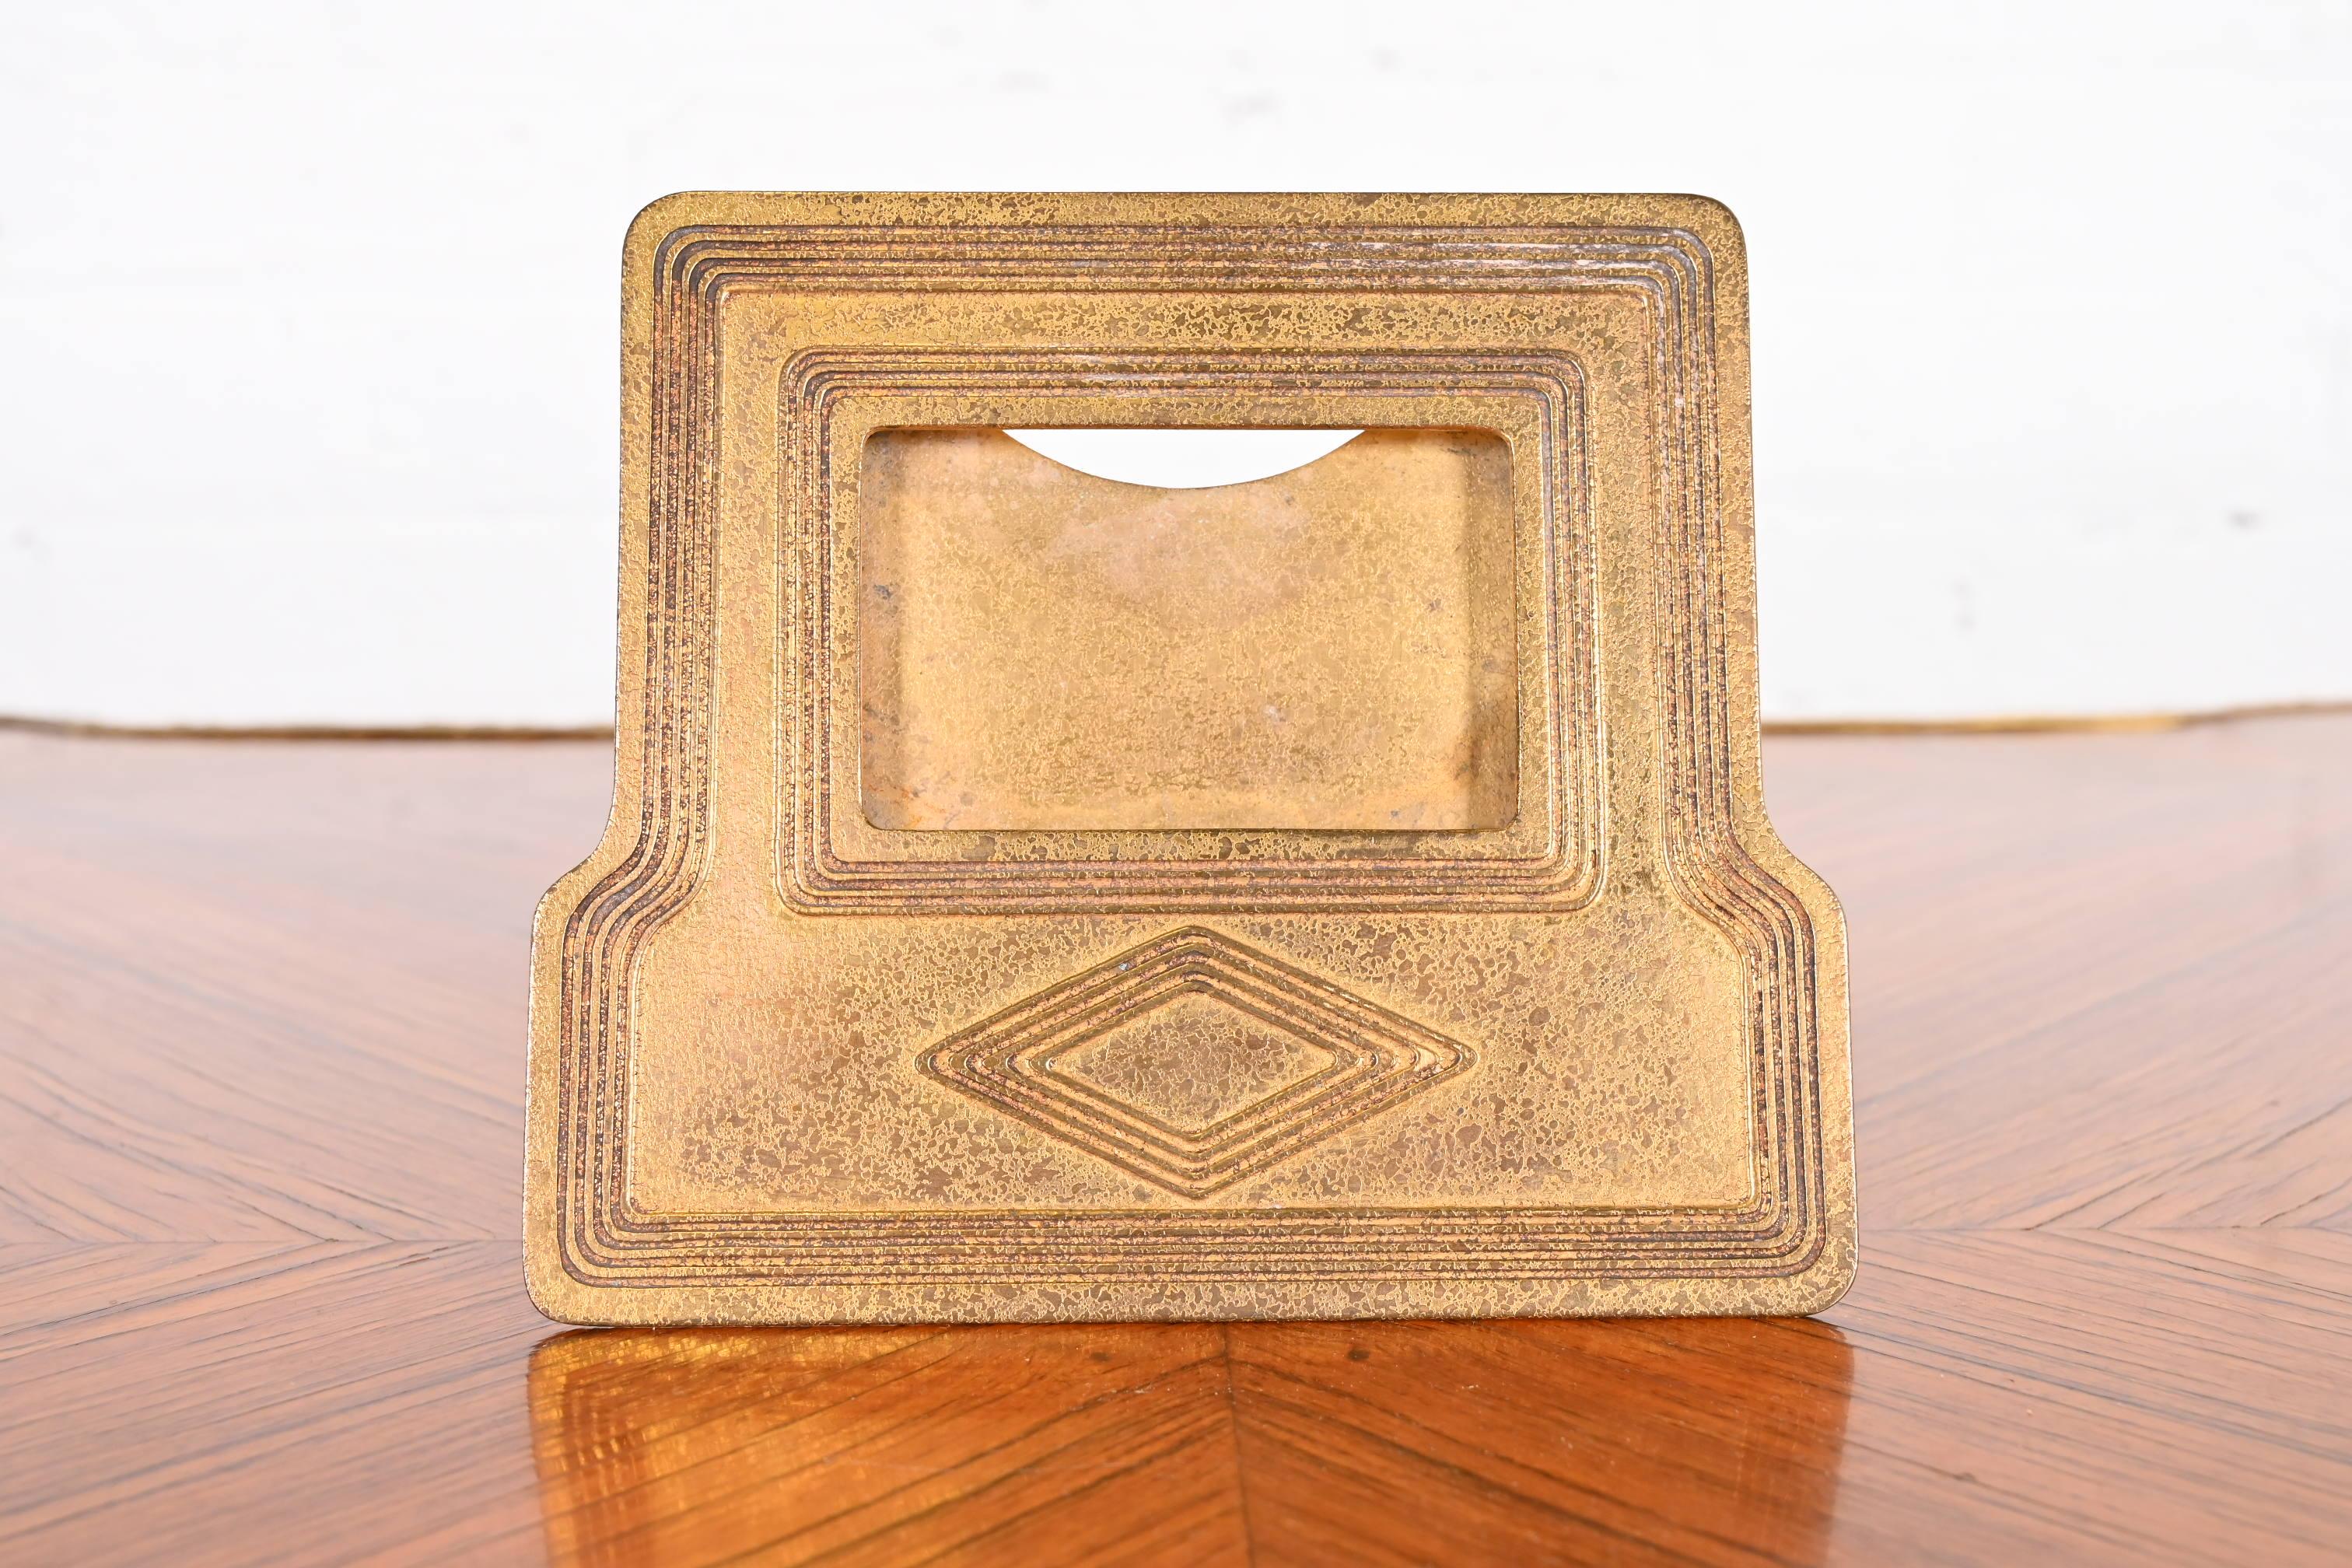 A gorgeous antique gilt bronze desk calendar frame or picture frame in the Graduate pattern

By Tiffany Studios (signed en verso)

New York, USA, Early 20th Century

Measures: 6.5